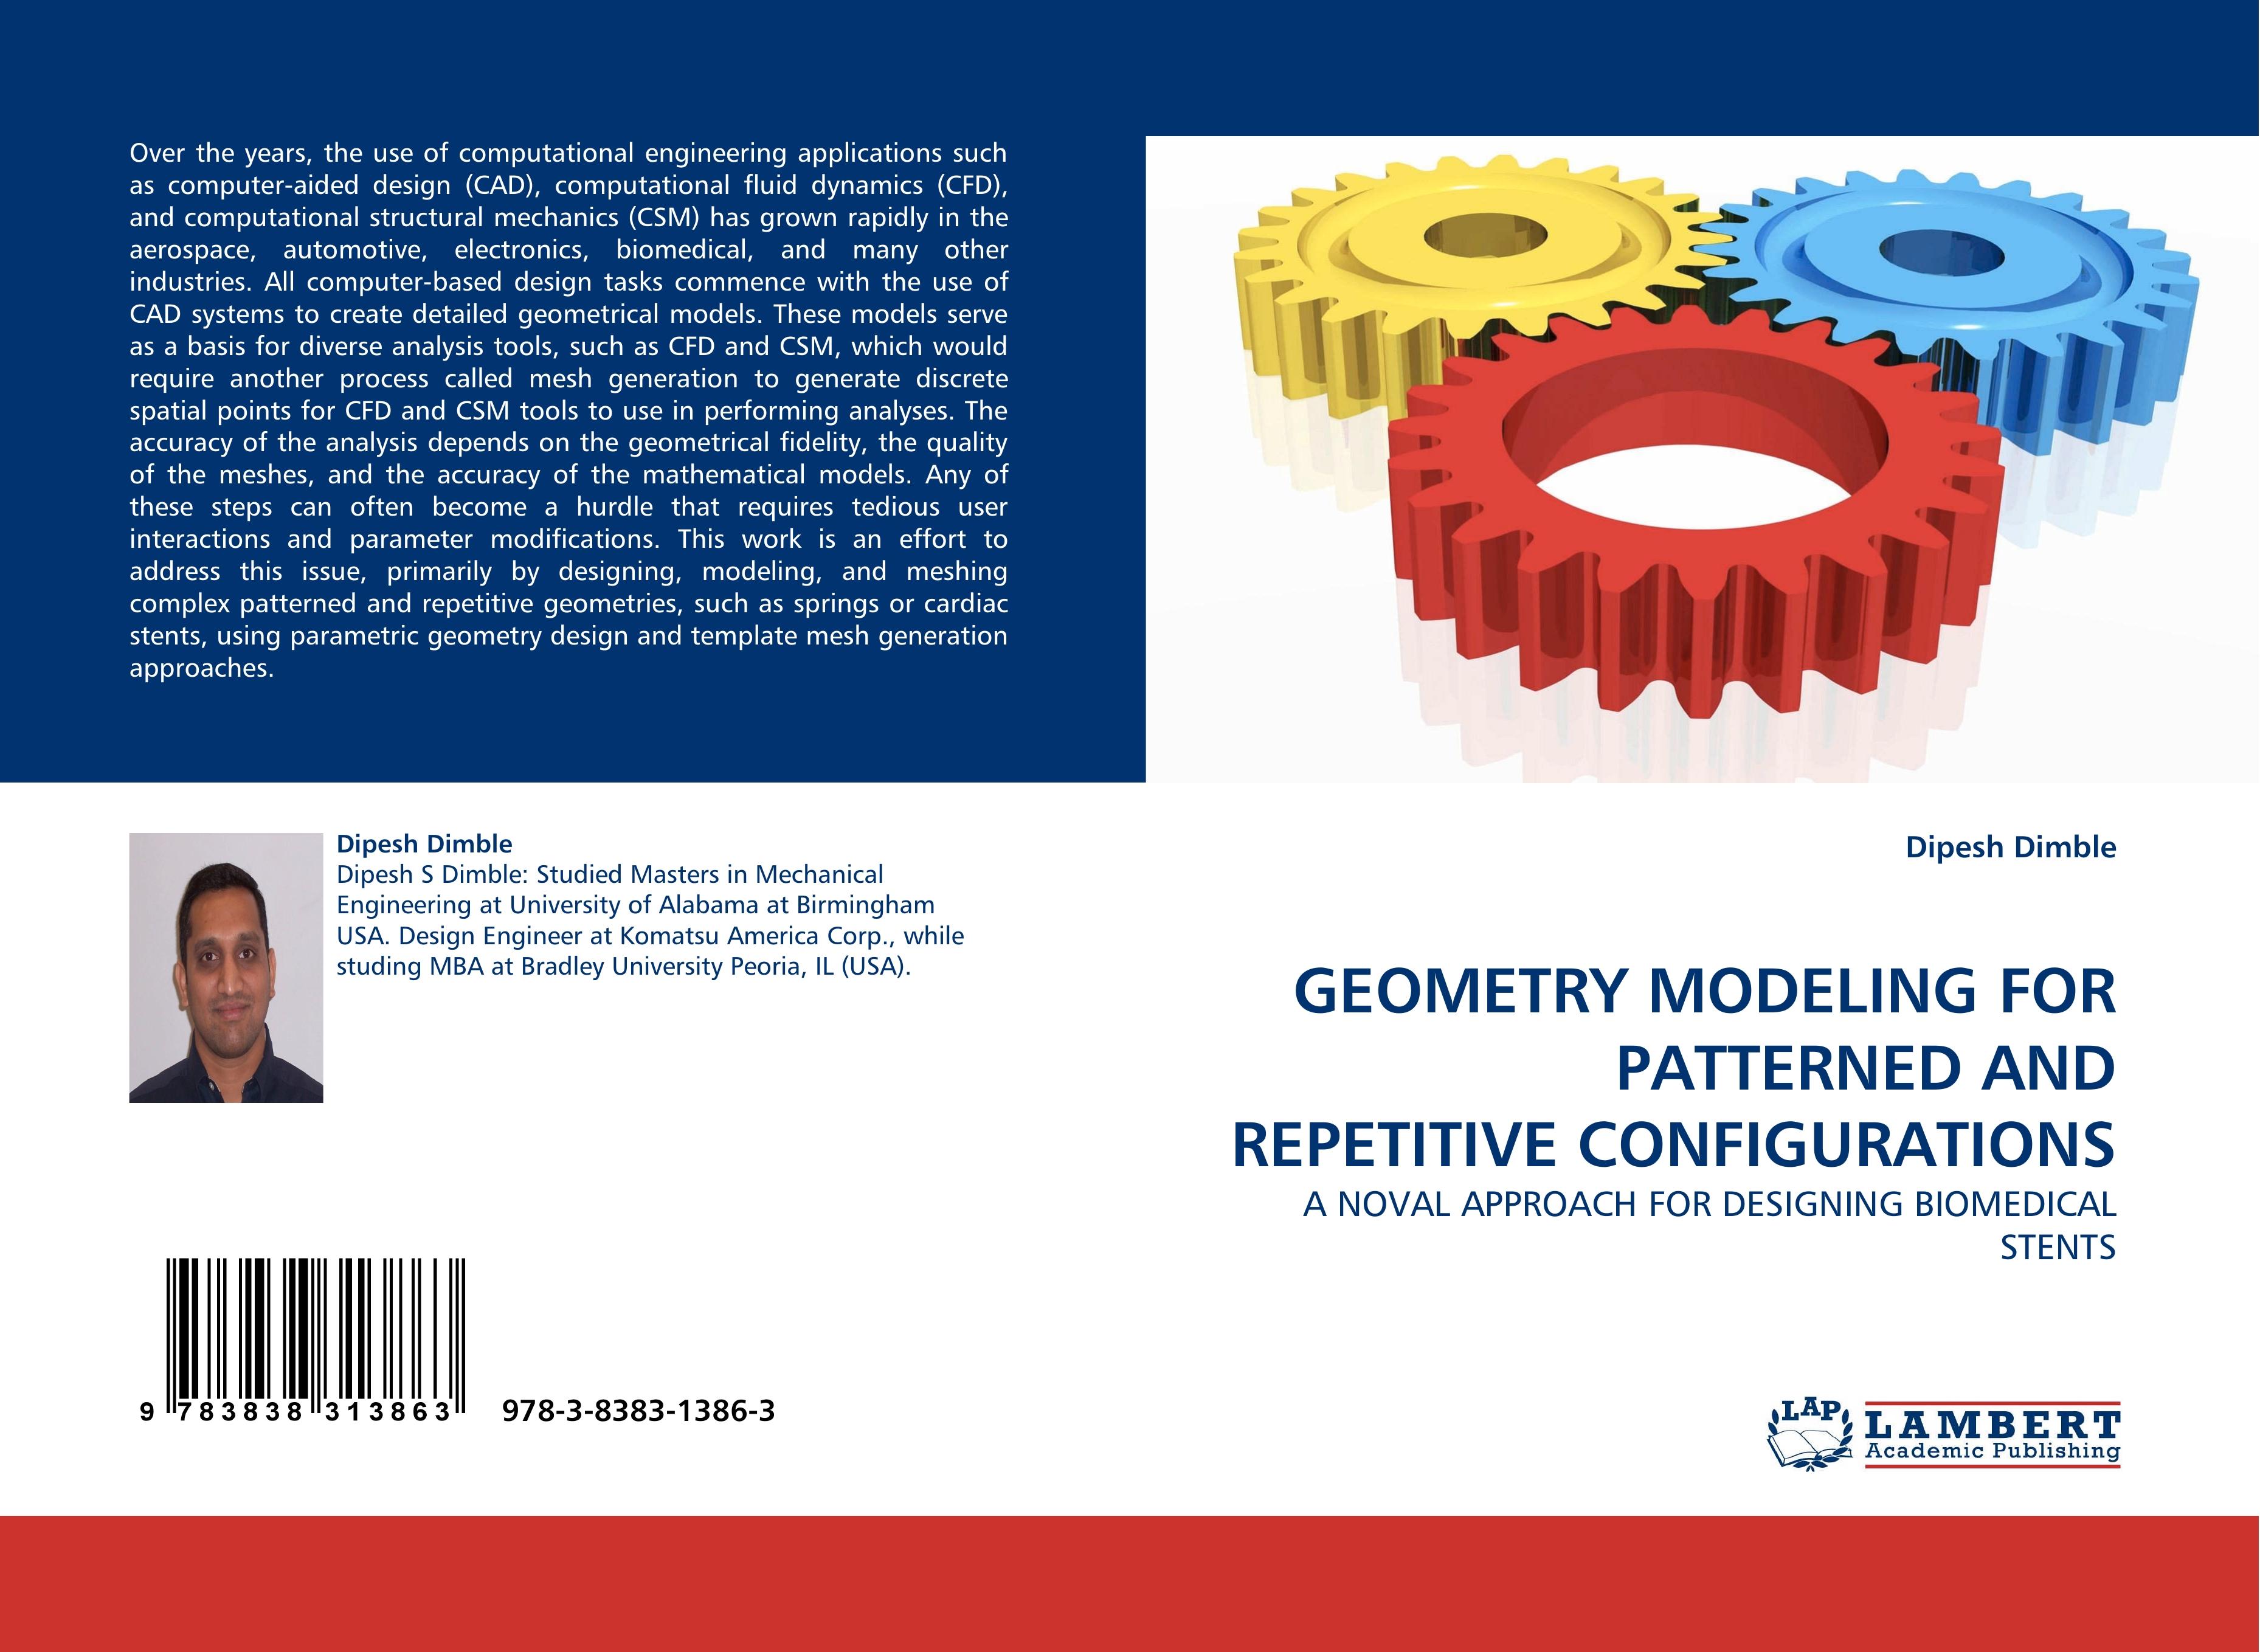 GEOMETRY MODELING FOR PATTERNED AND REPETITIVE CONFIGURATIONS / A NOVAL APPROACH FOR DESIGNING BIOMEDICAL STENTS / Dipesh Dimble / Taschenbuch / Paperback / 76 S. / Englisch / 2009 / EAN 9783838313863 - Dimble, Dipesh